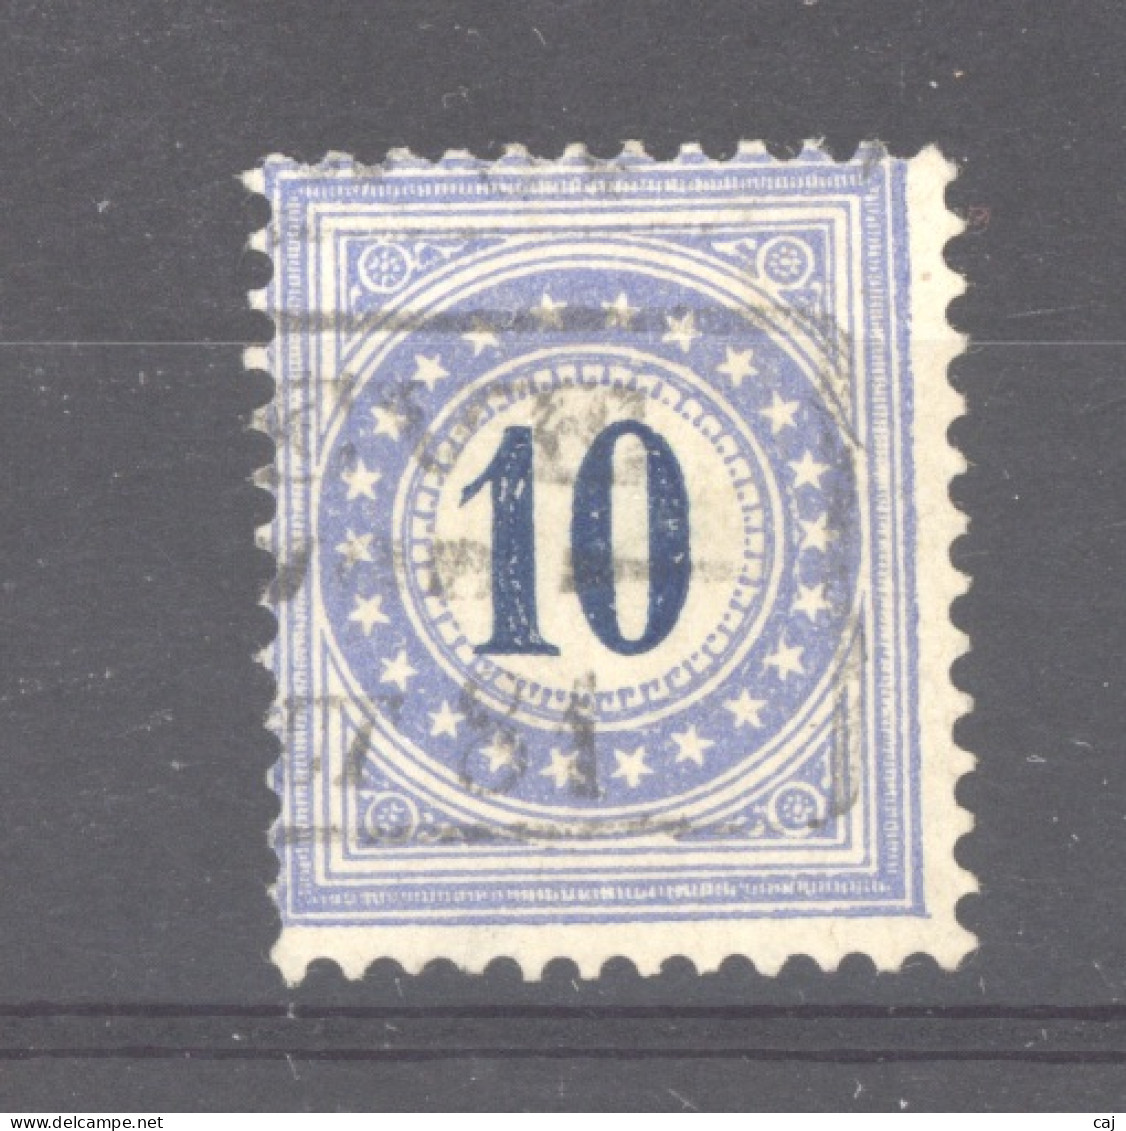 0ch  1559   -  Suisse   -  Taxe  -  1878  :    5  (o) ,  Type II , Cadre Normal - Taxe